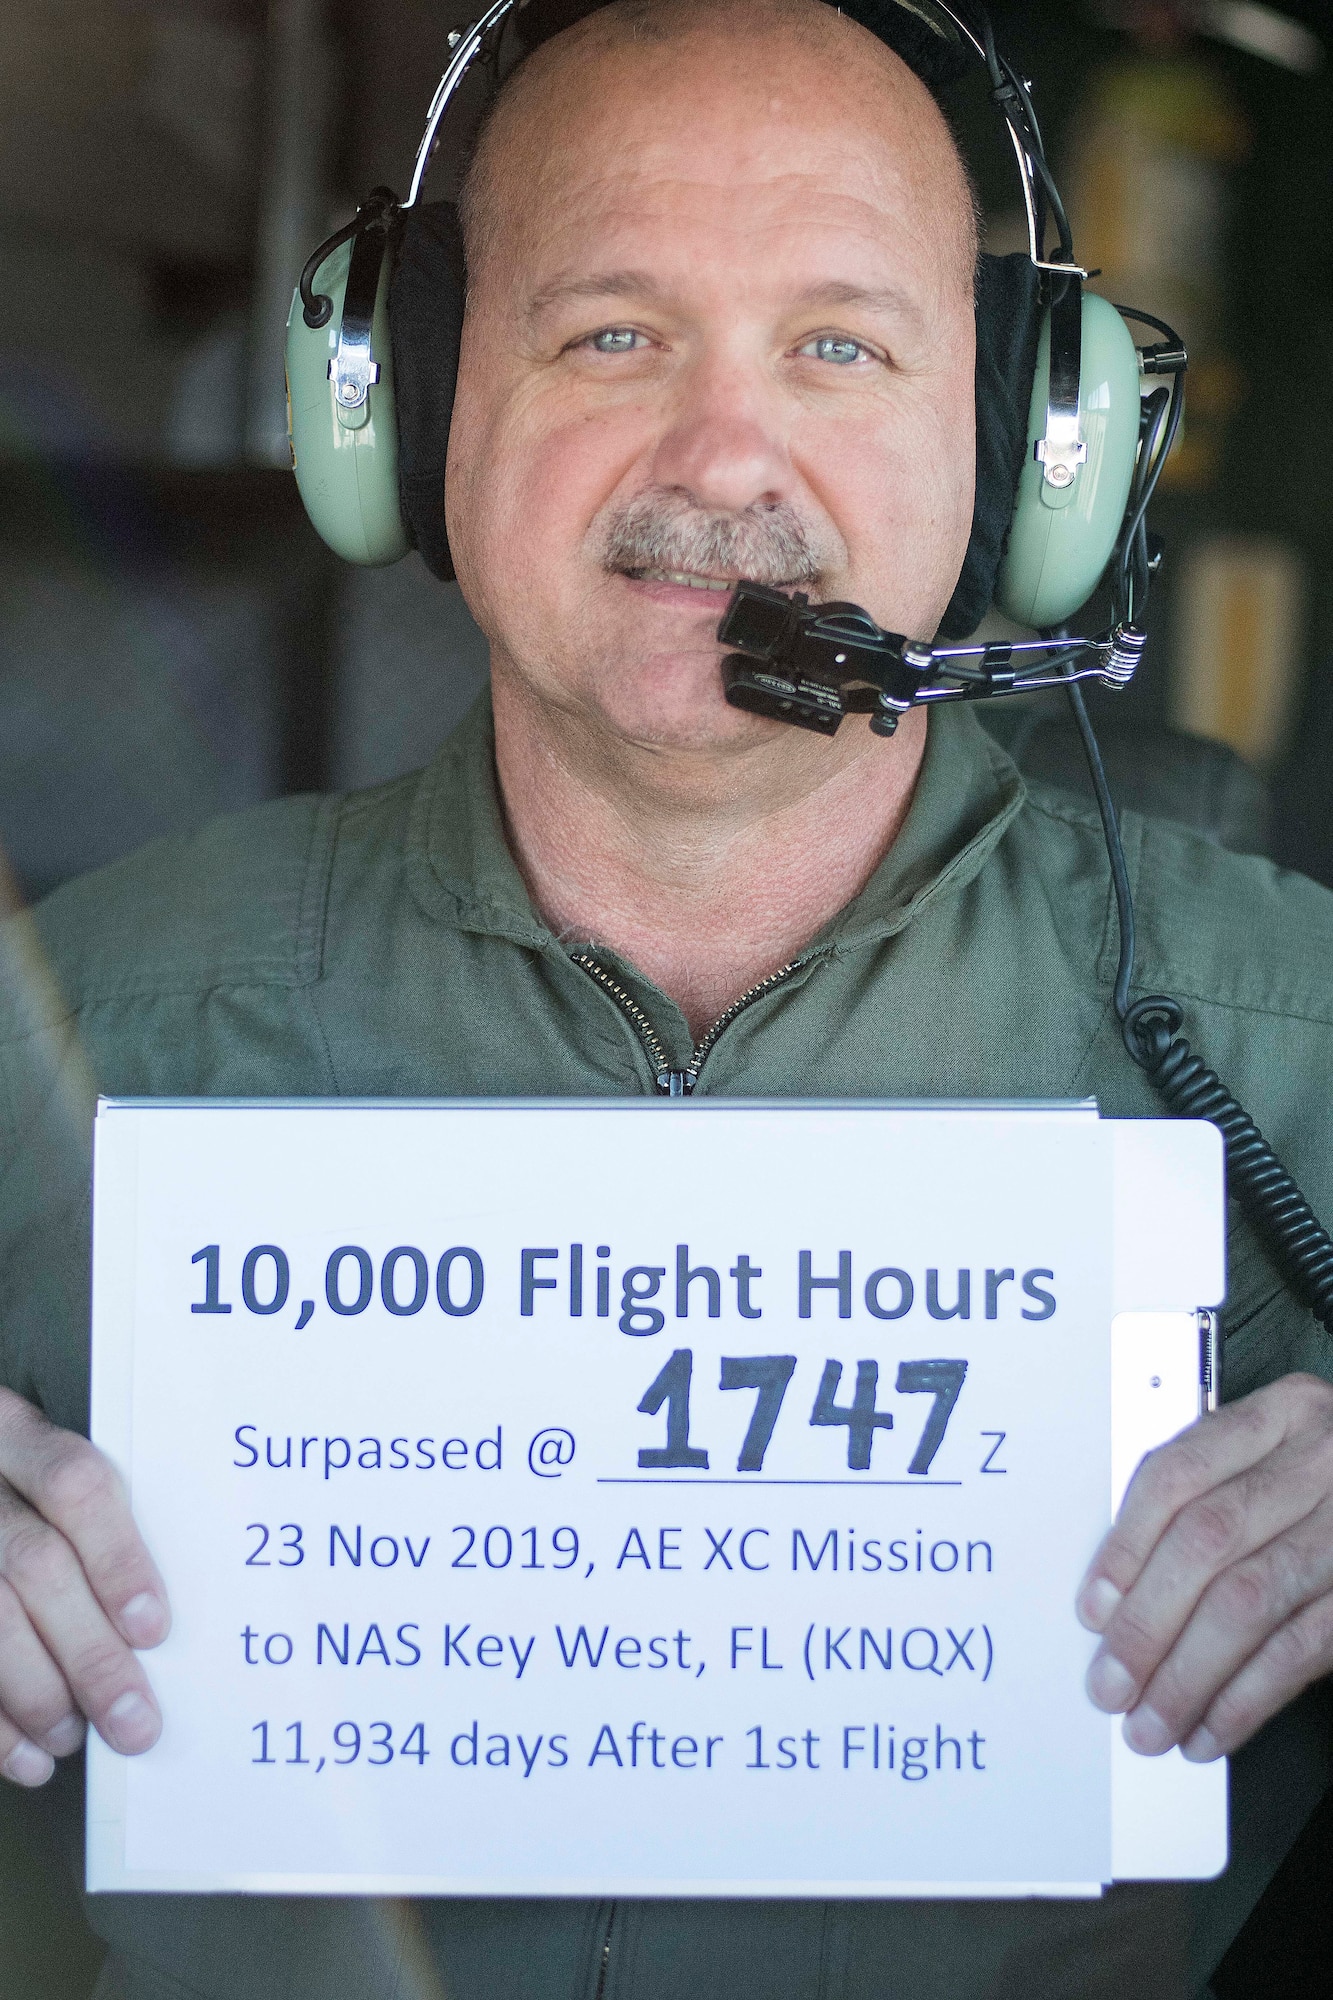 Chief Master Sgt. Terry Studstill, 700th Airlift Squadron flight engineer superintendent, poses with a sign showing the time and location where he attained 10,000 flight hours. He accomplished this major milestone Nov. 23, 2019 on a C-130H3 Hercules bound for Key West, Florida. (U.S. Air Force photo/Tech. Sgt. Andrew Park)